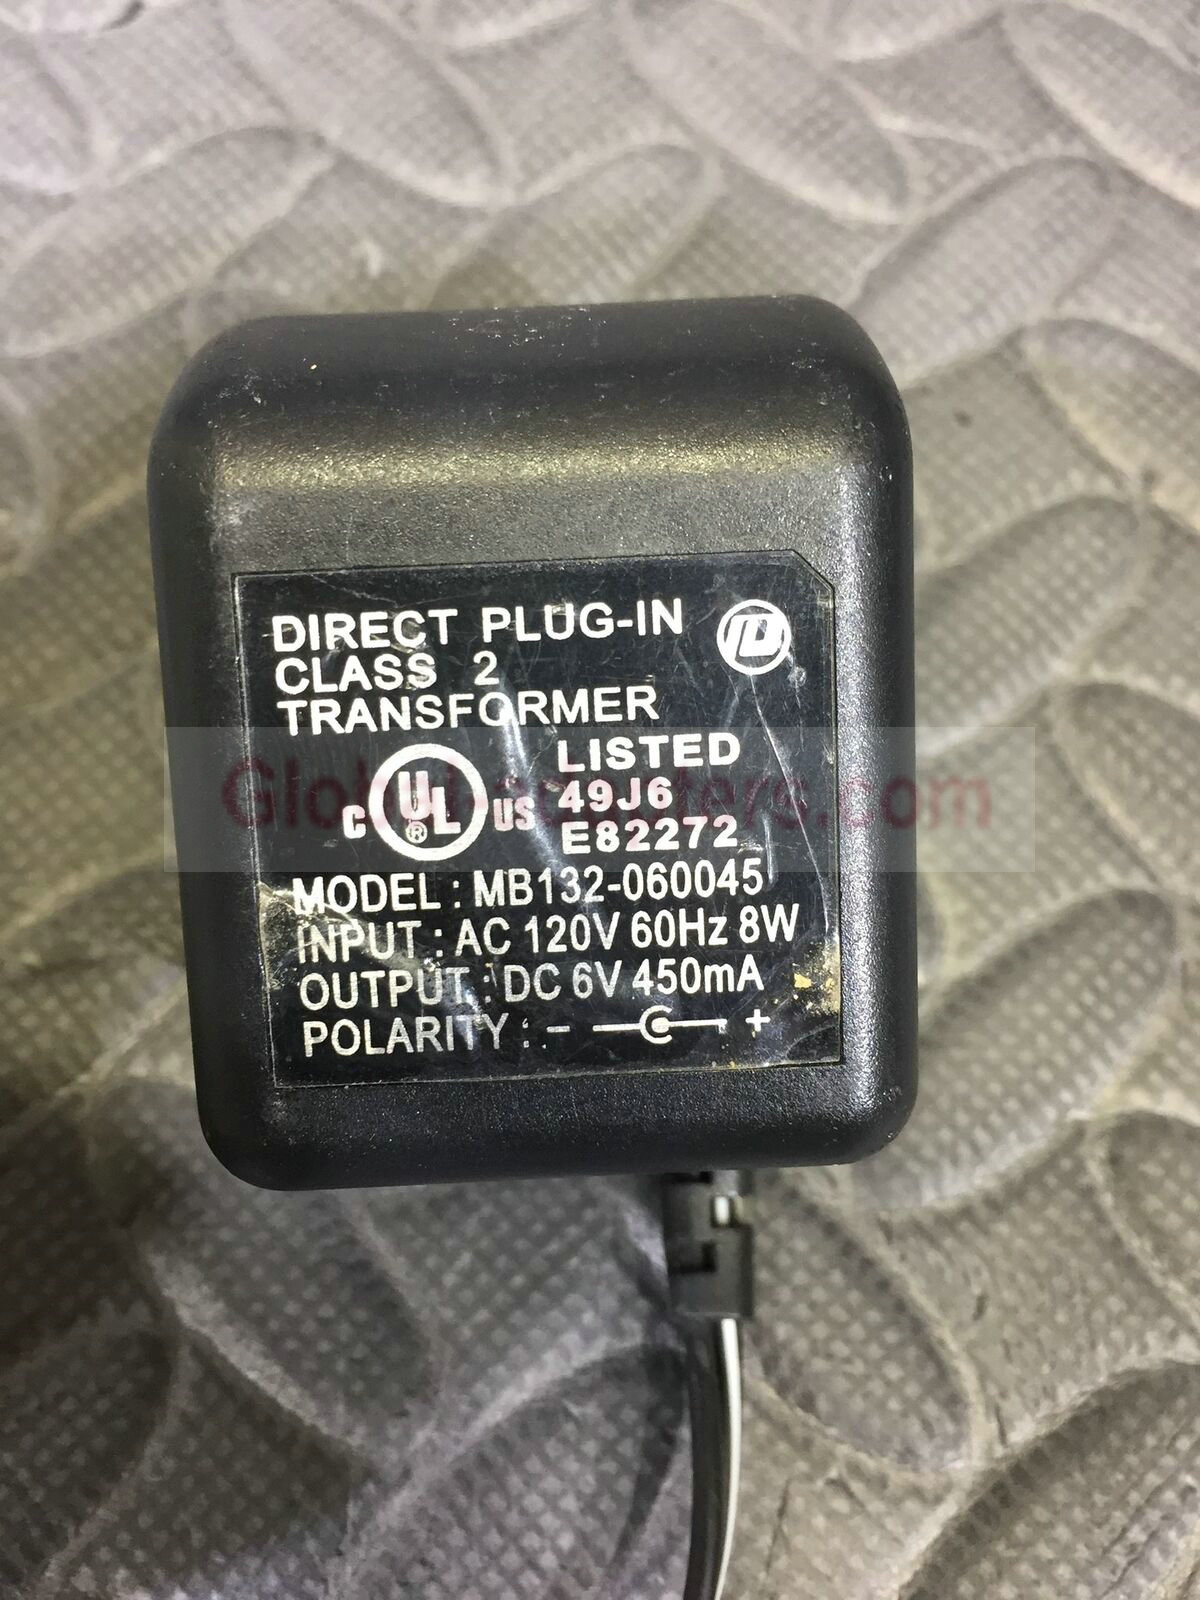 New 6V 450mA MB132-060045 Class 2 Transformer Power Supply Ac Adapter - Click Image to Close